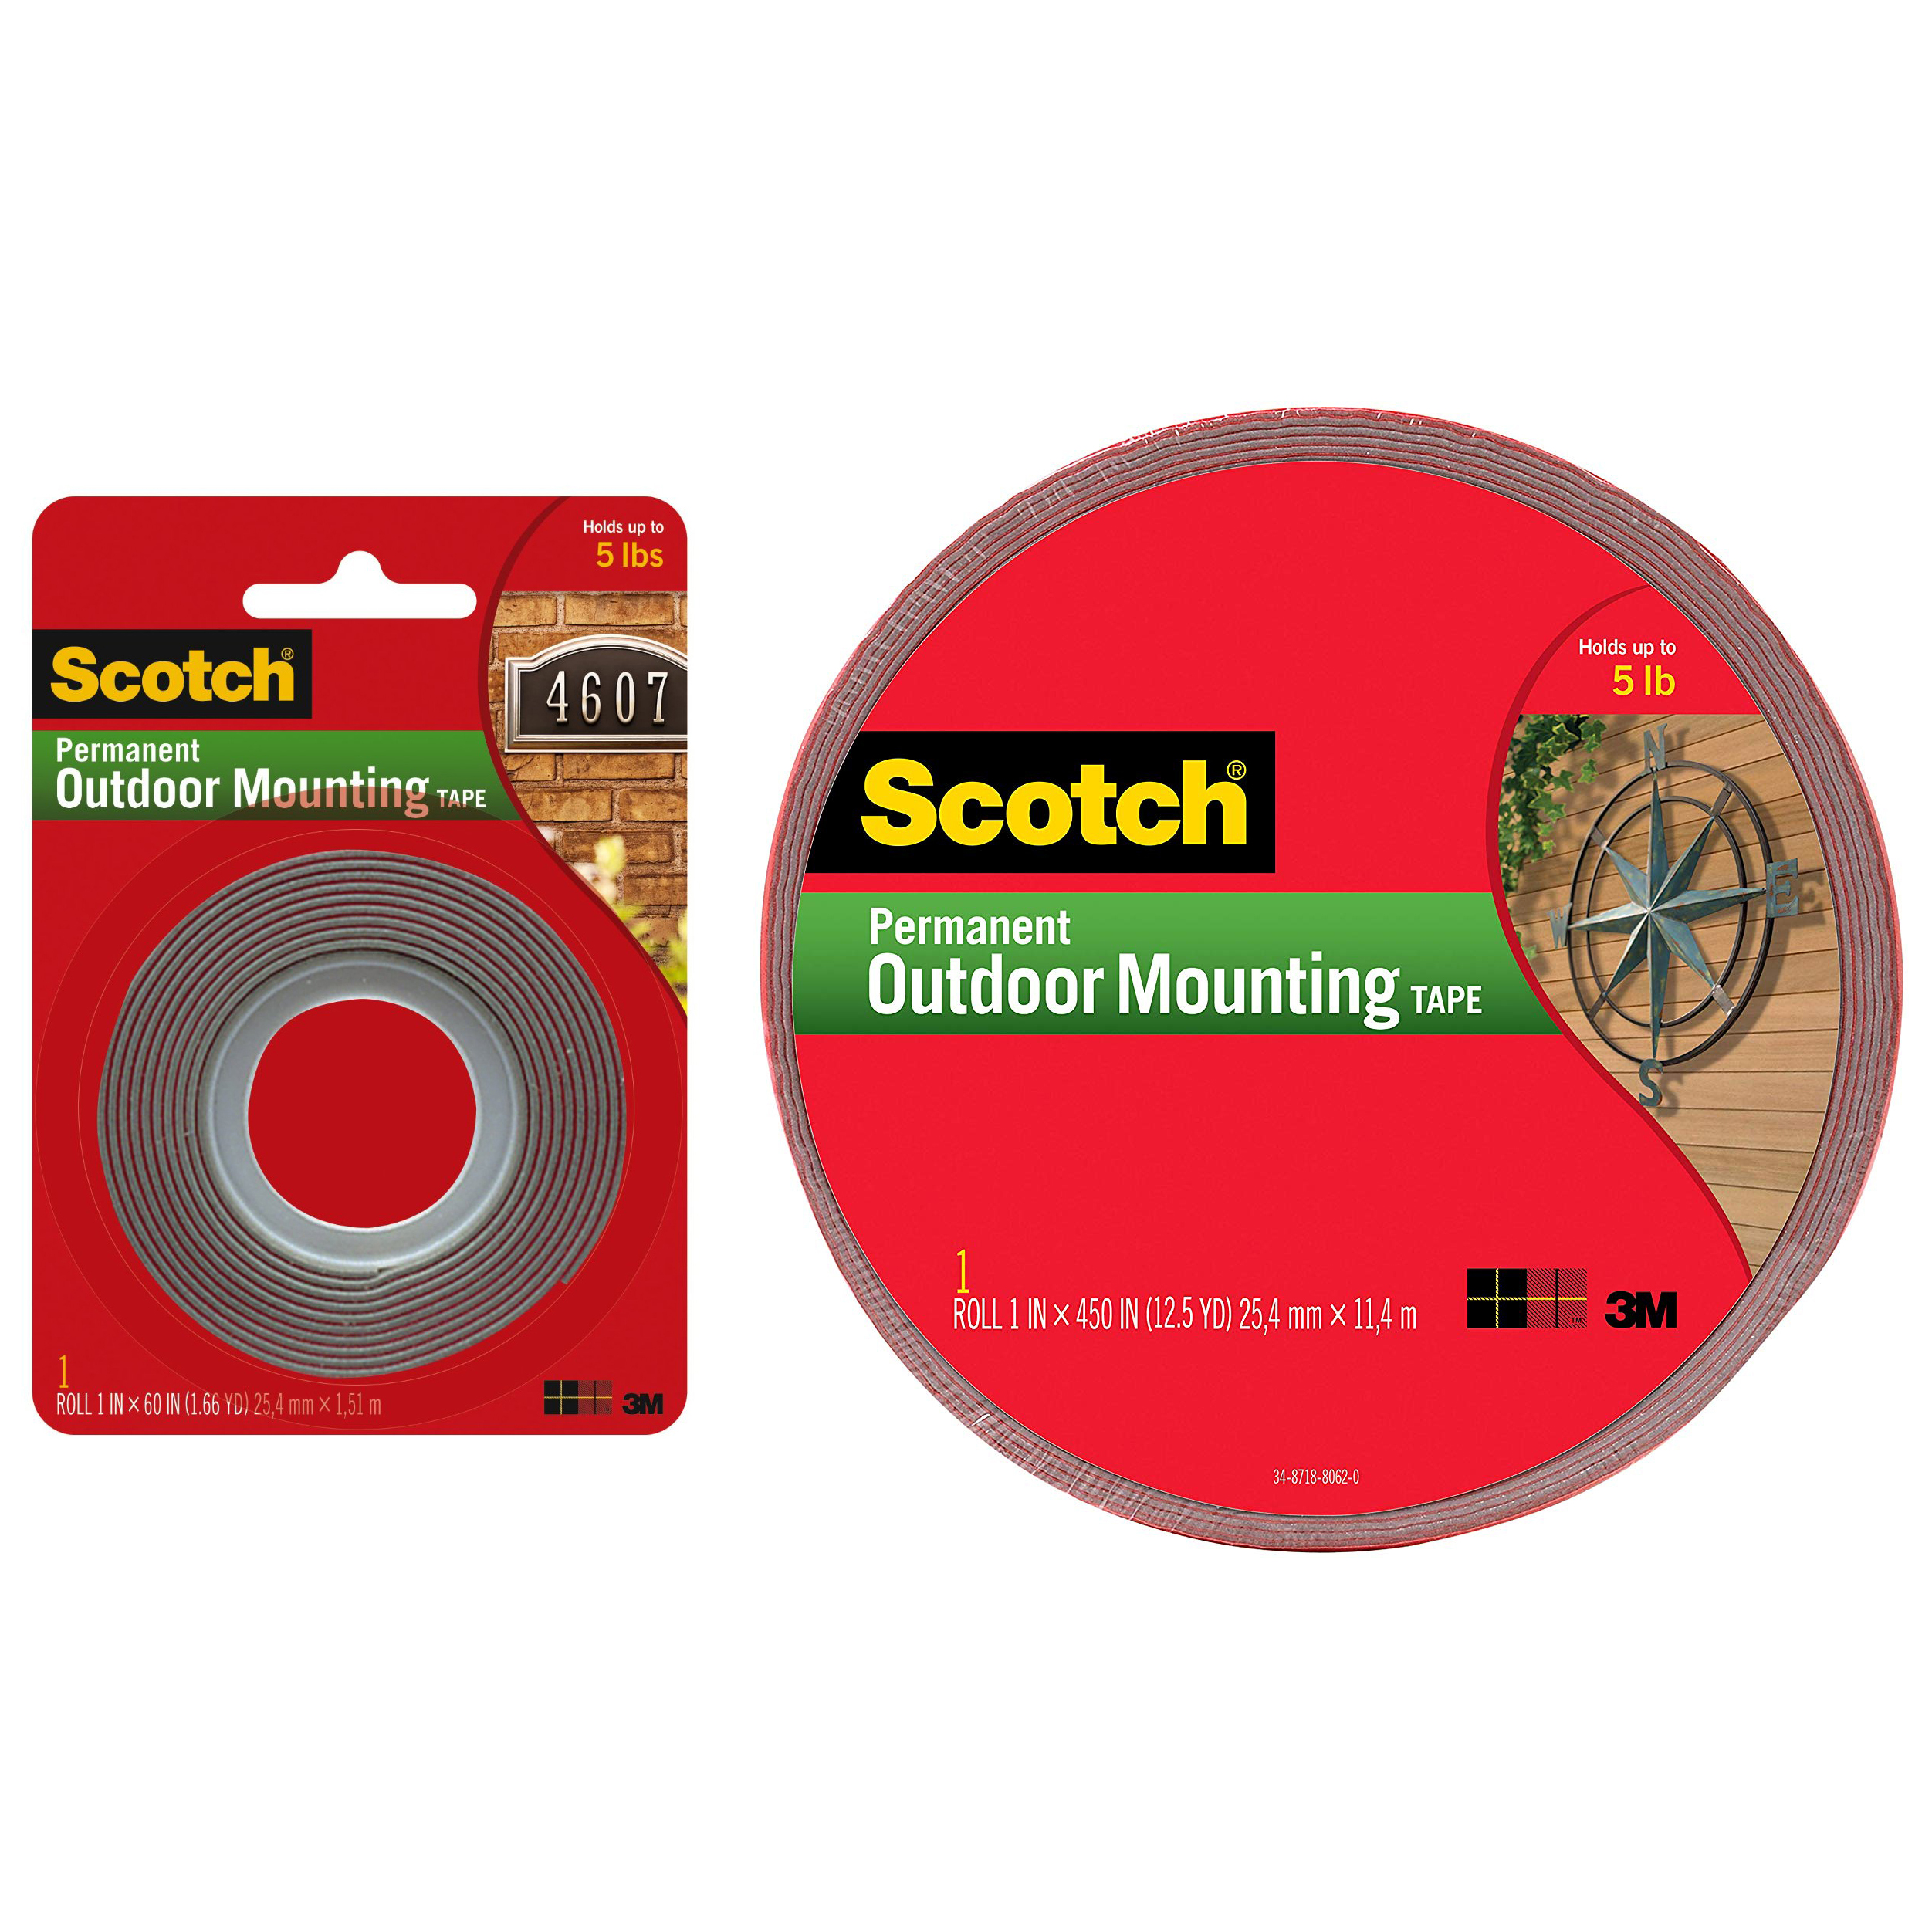 3M 4011 Scotch Permanent Outdoor Mounting Tape